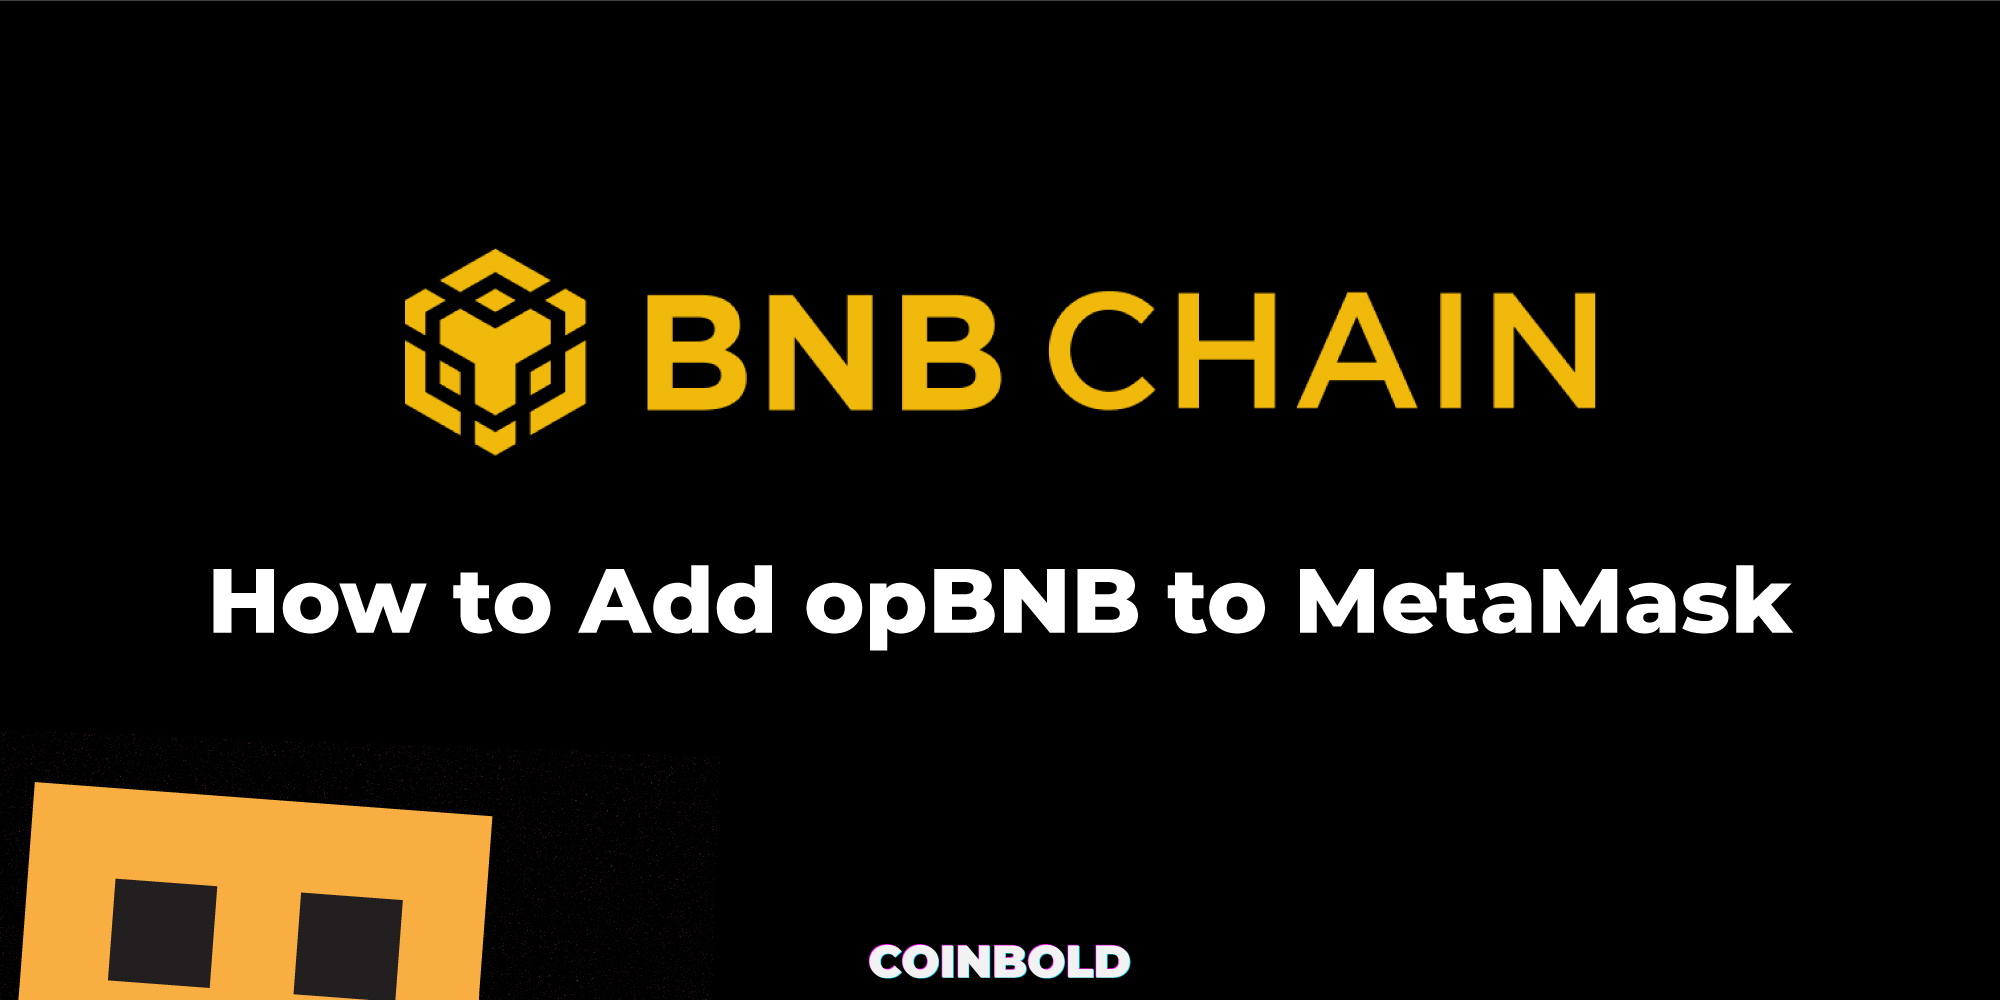 How to Add opBNB to MetaMask